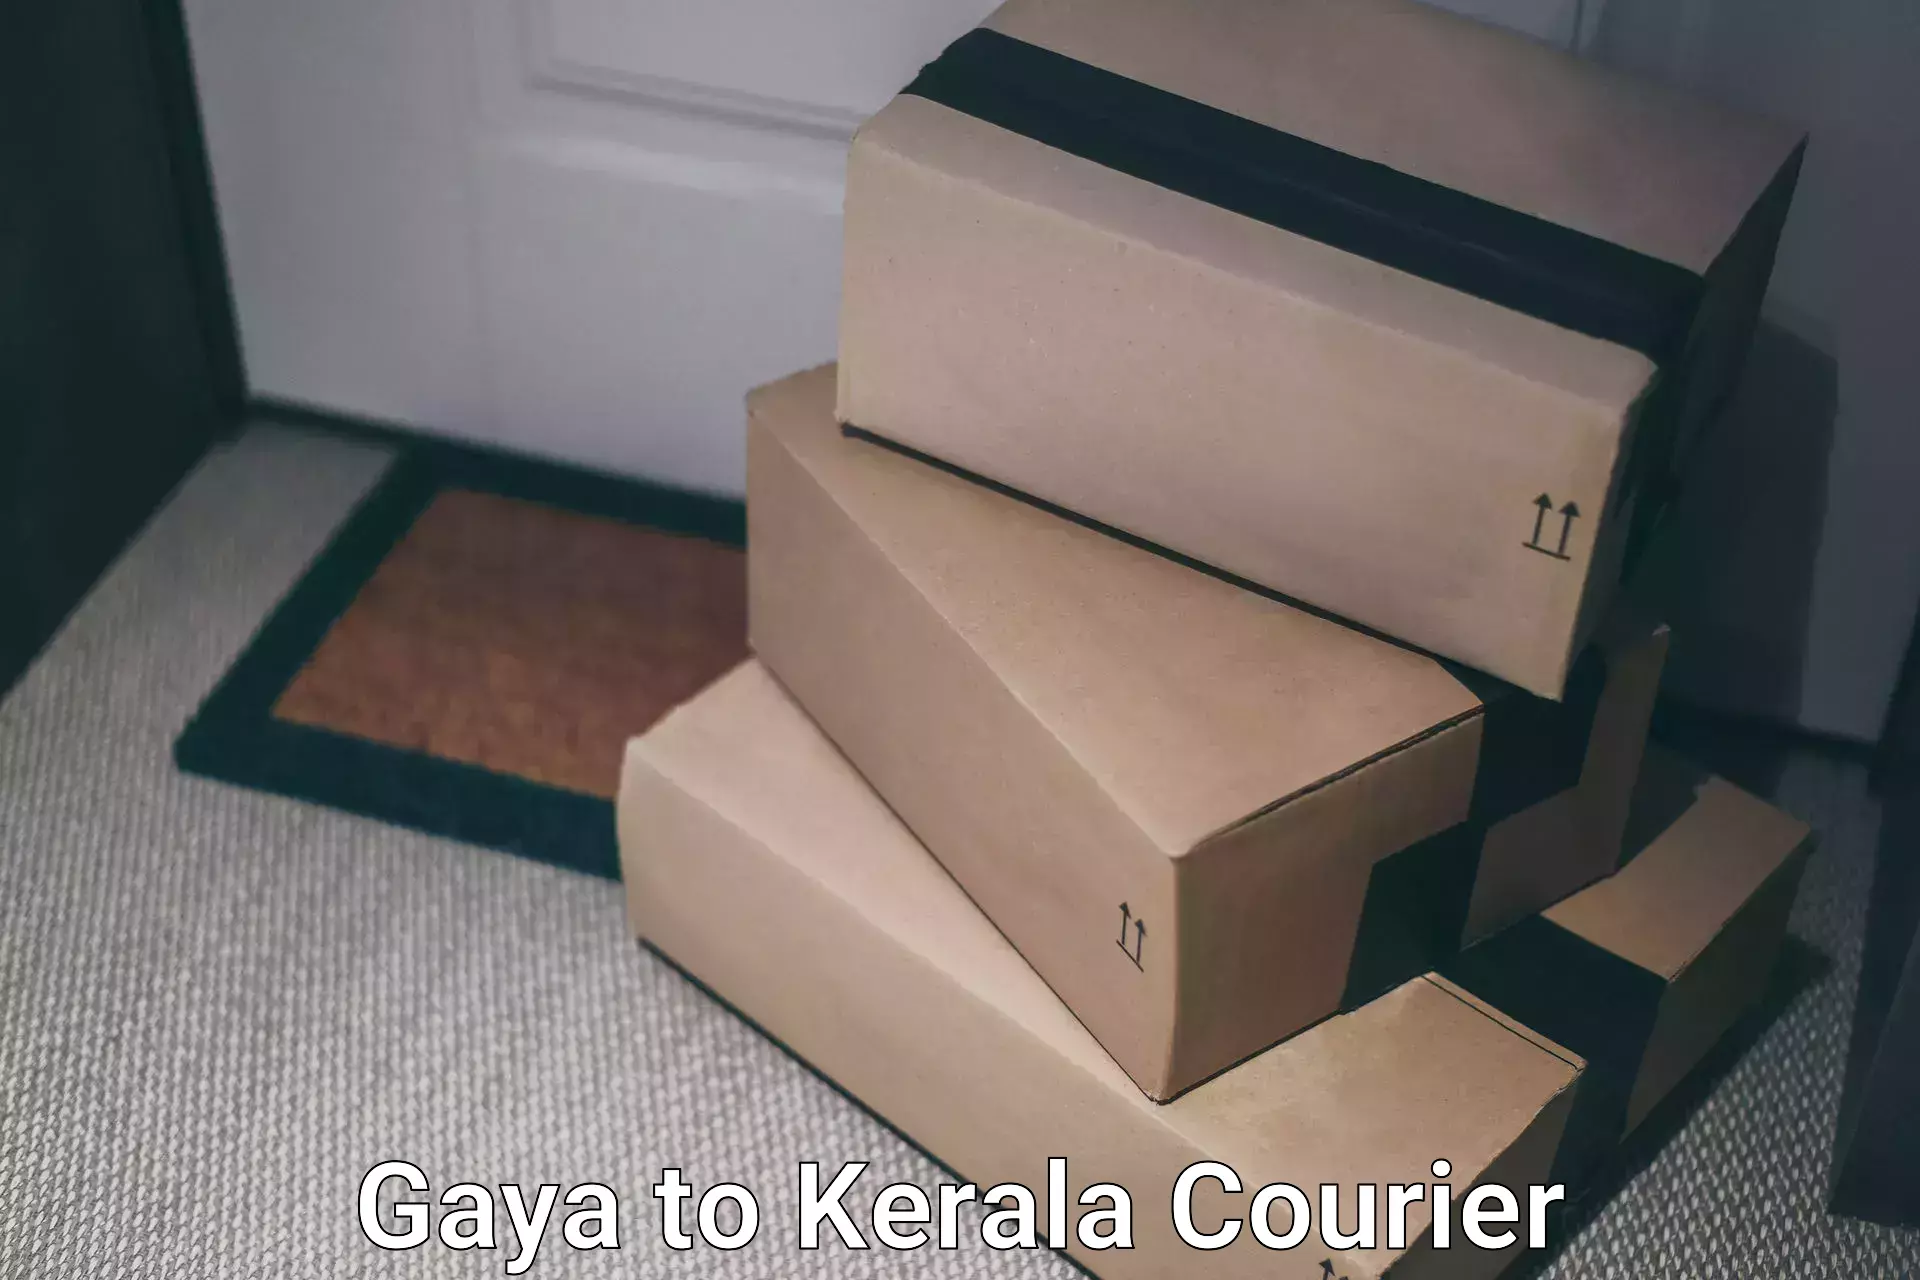 Personal parcel delivery in Gaya to Trivandrum